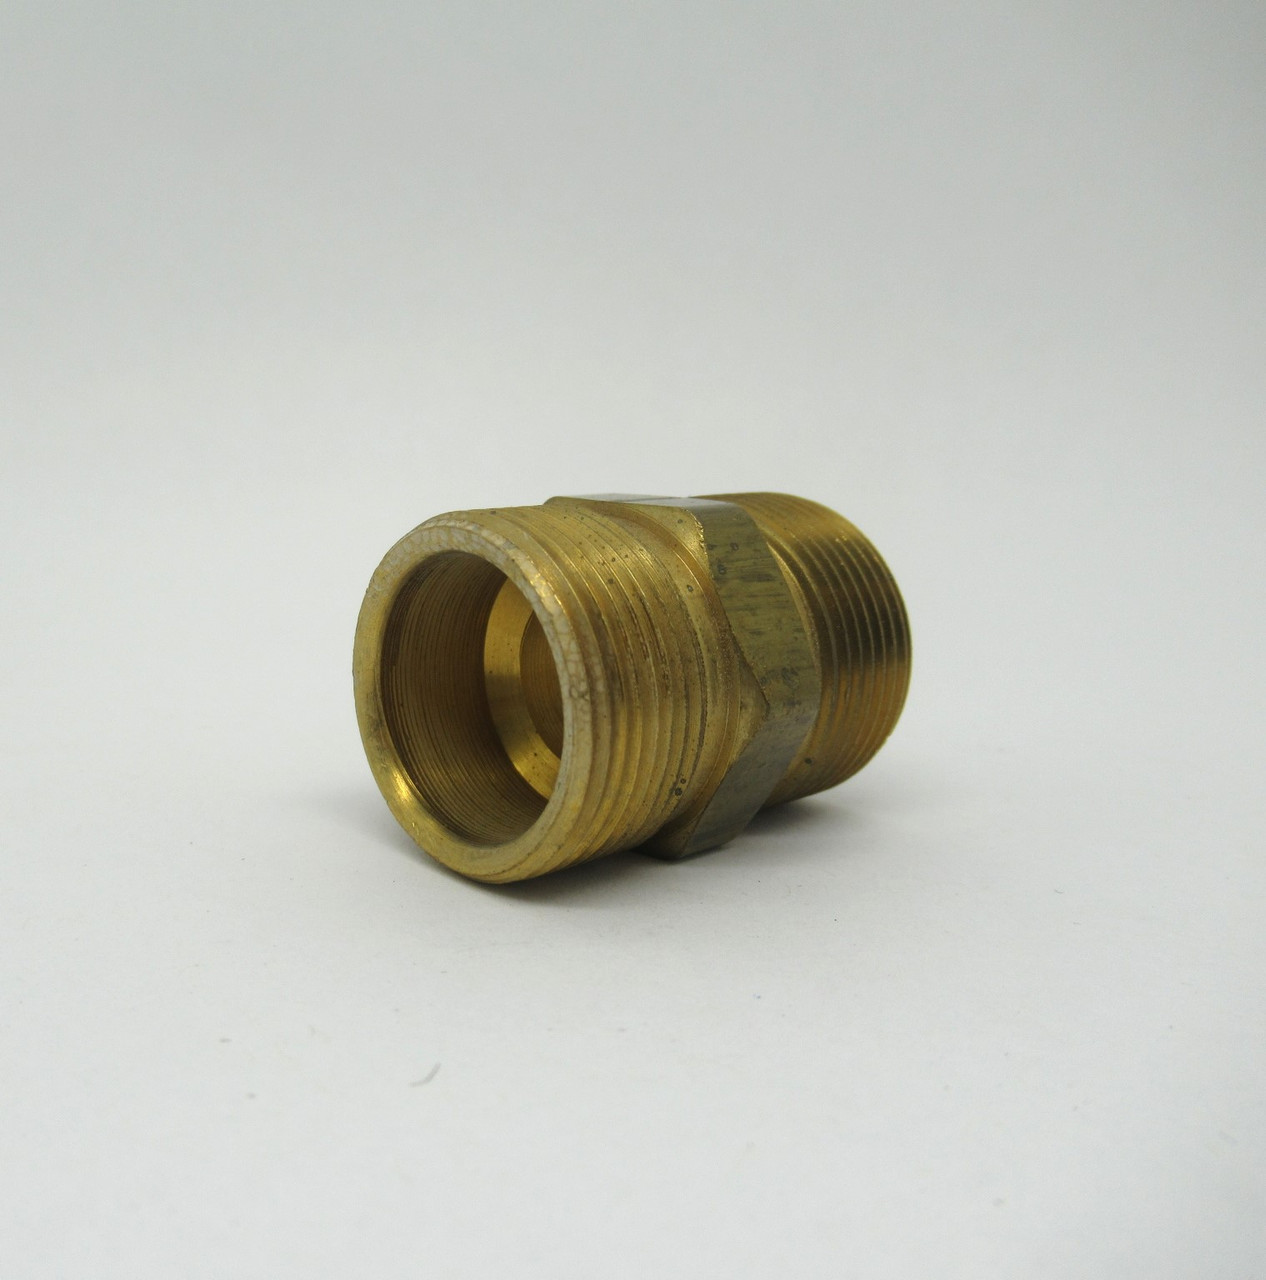 Fairview 62-12 Union 3/4" Coupling Brass USED